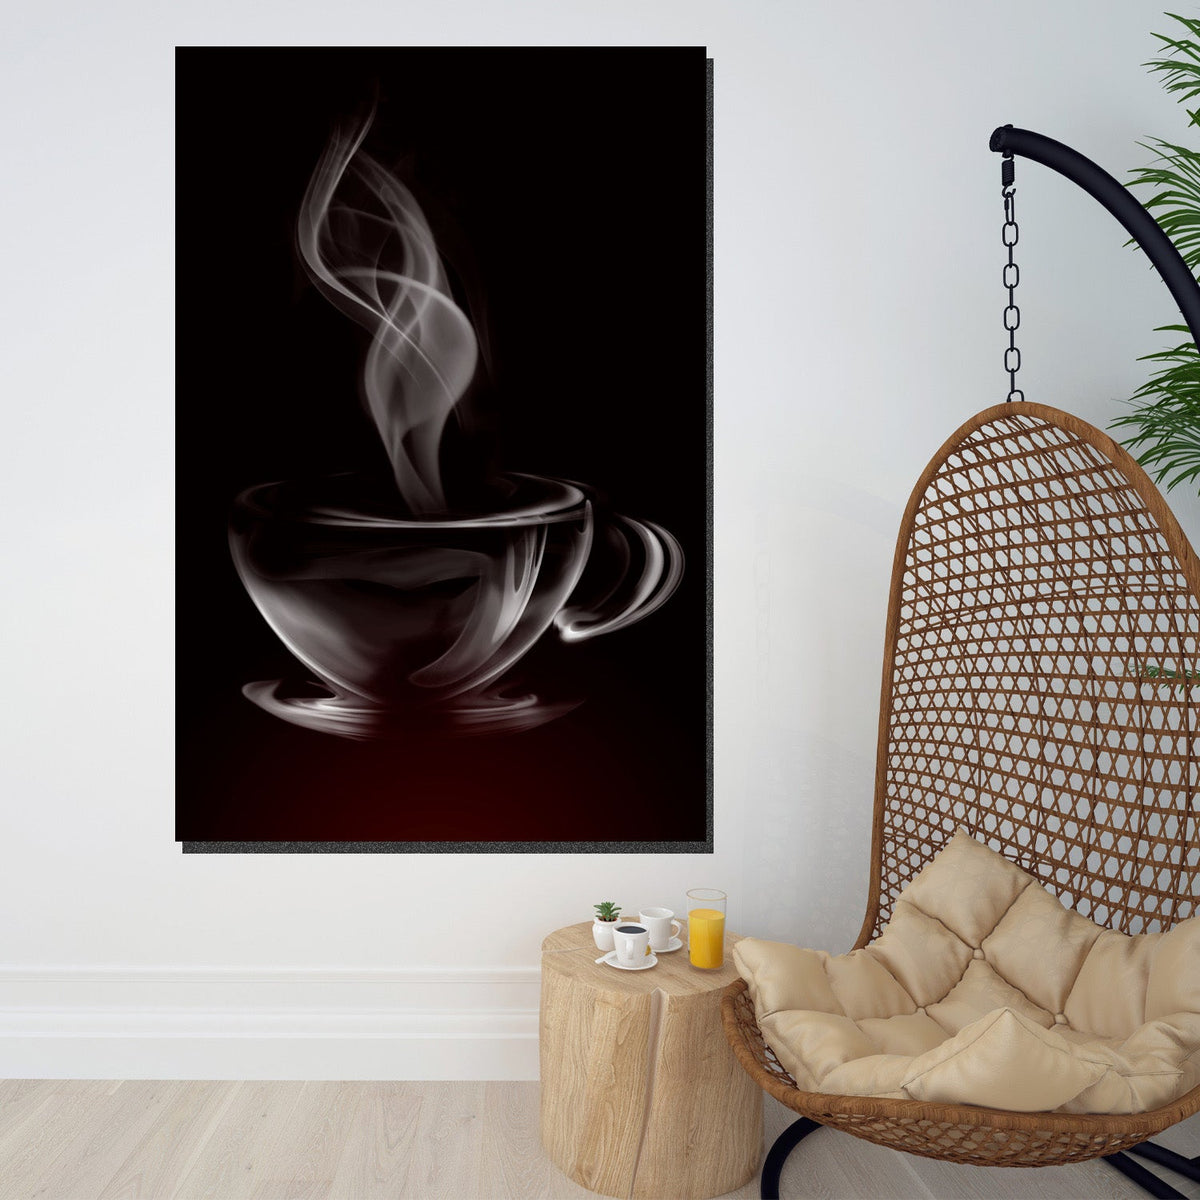 https://cdn.shopify.com/s/files/1/0387/9986/8044/products/SmokeyCupofCoffeeCanvasArtprintStretched-4.jpg